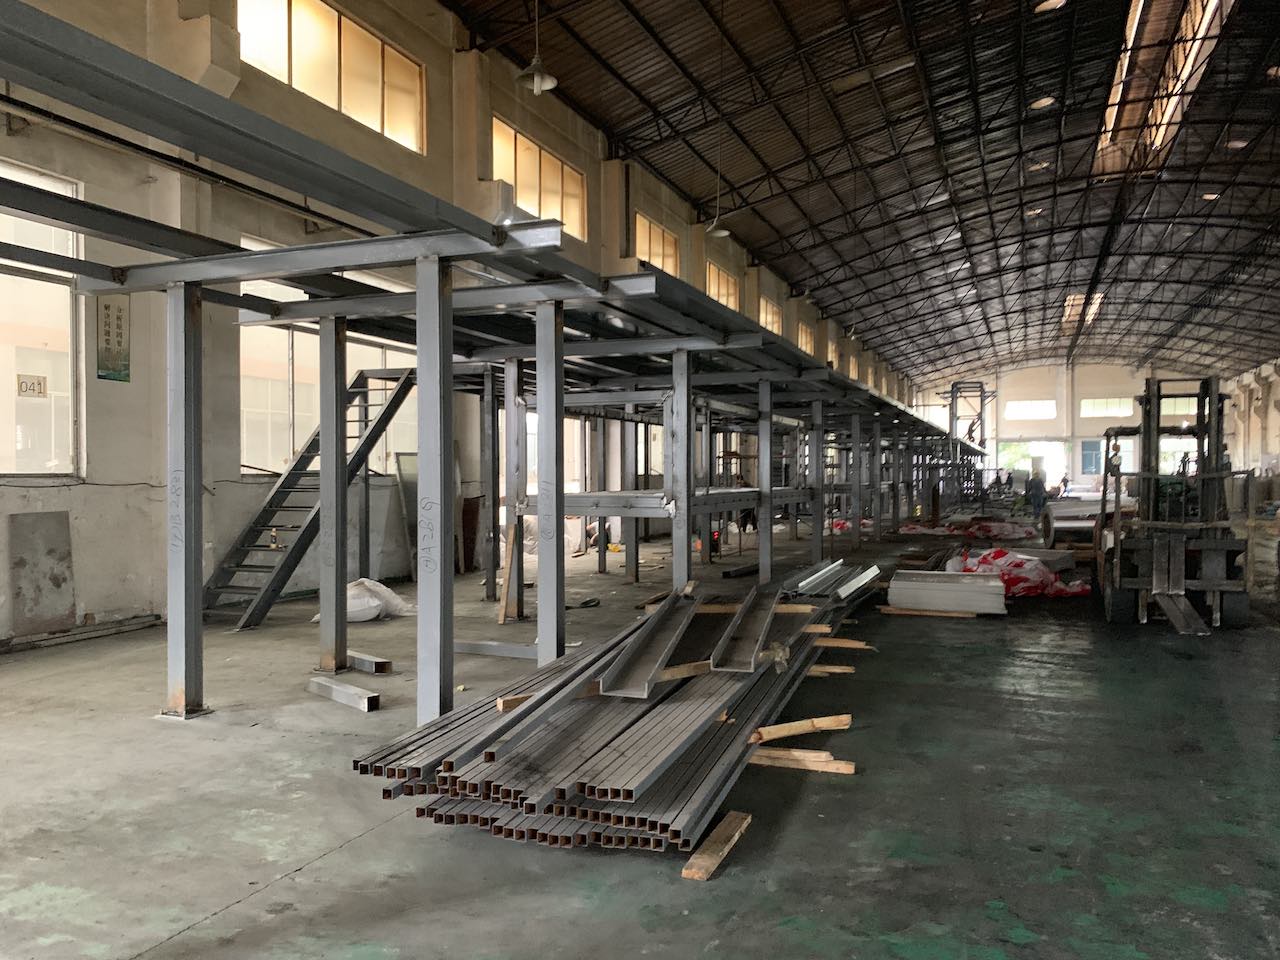 New professional coating production line is under construction 